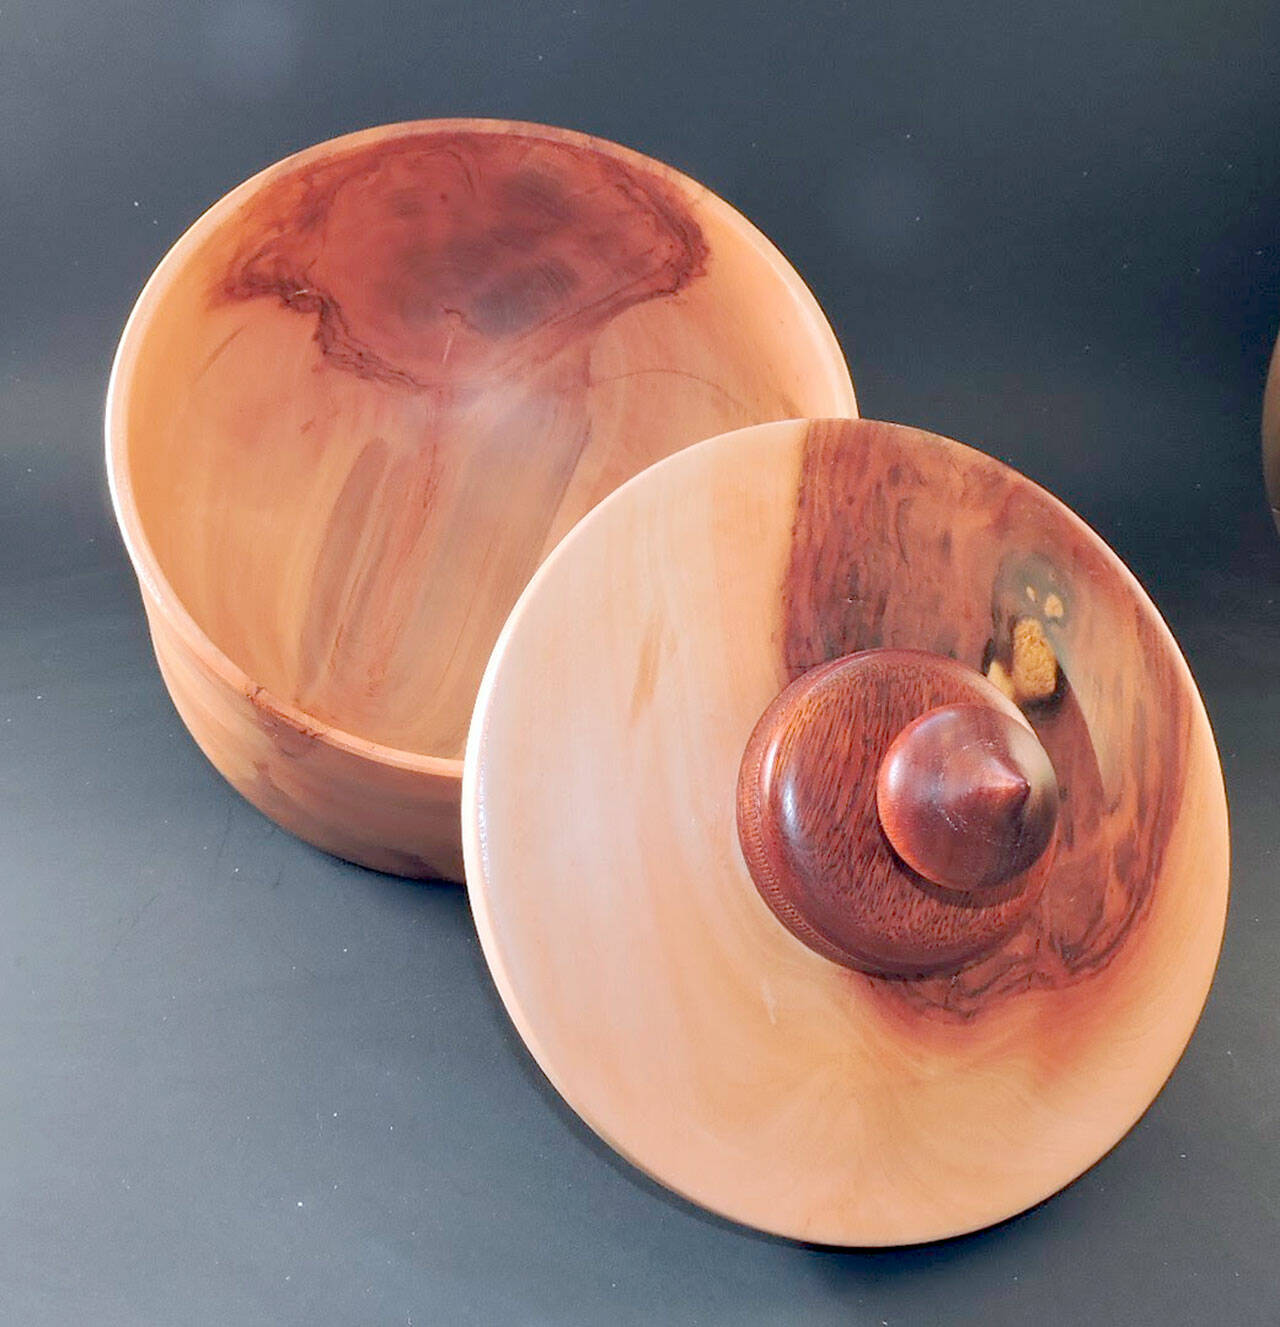 Jim Conway’s wood turning makes art of functional objects.